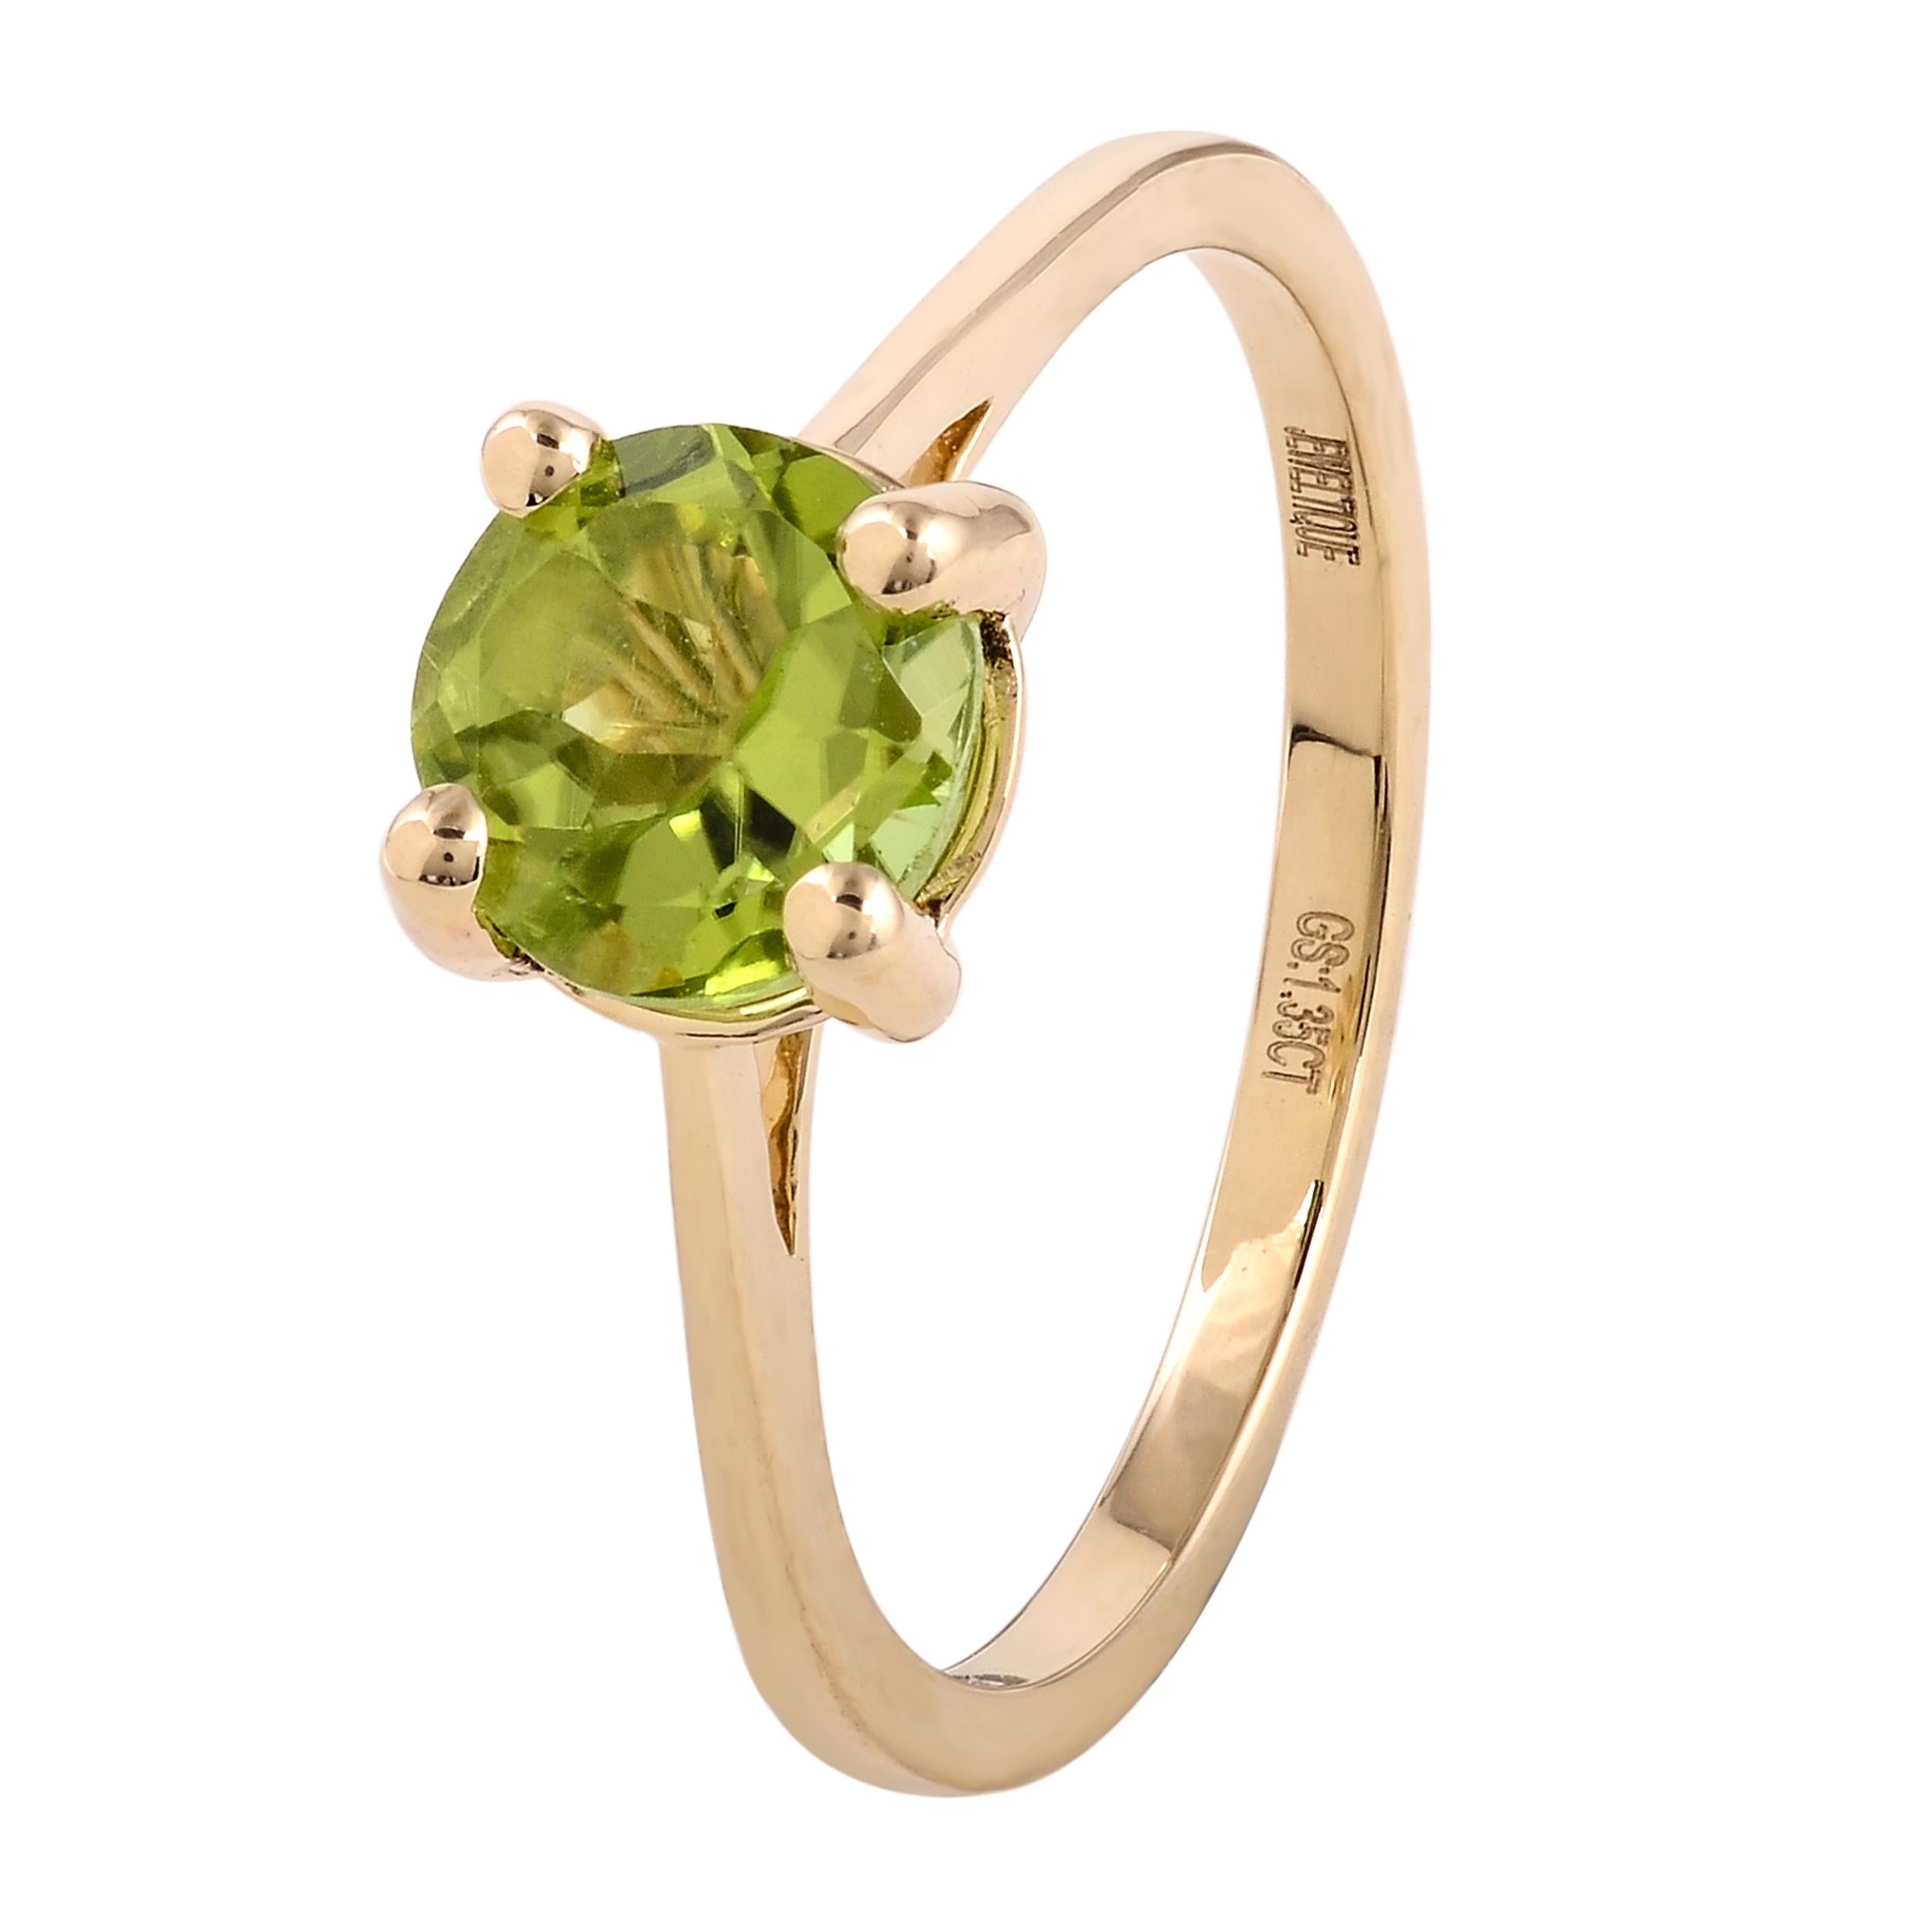 Chic 14K 1.09ct Peridot Solitaire Cocktail Ring, Size 7 - Statement Jewelry For Sale 3